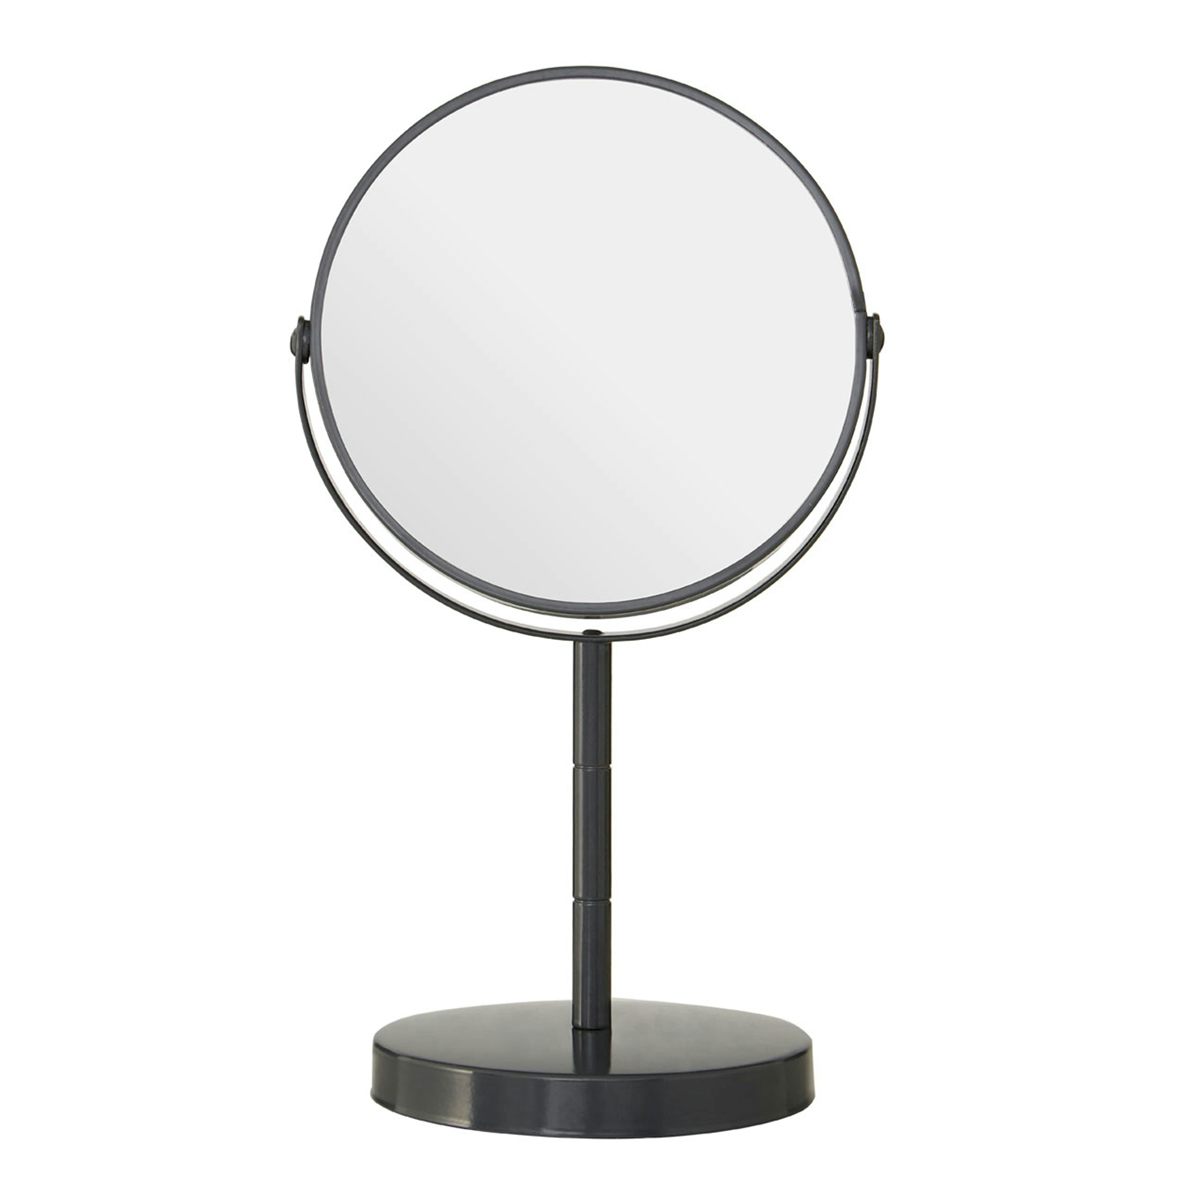 Accents Grey small freestanding vanity mirror with 2x magnification